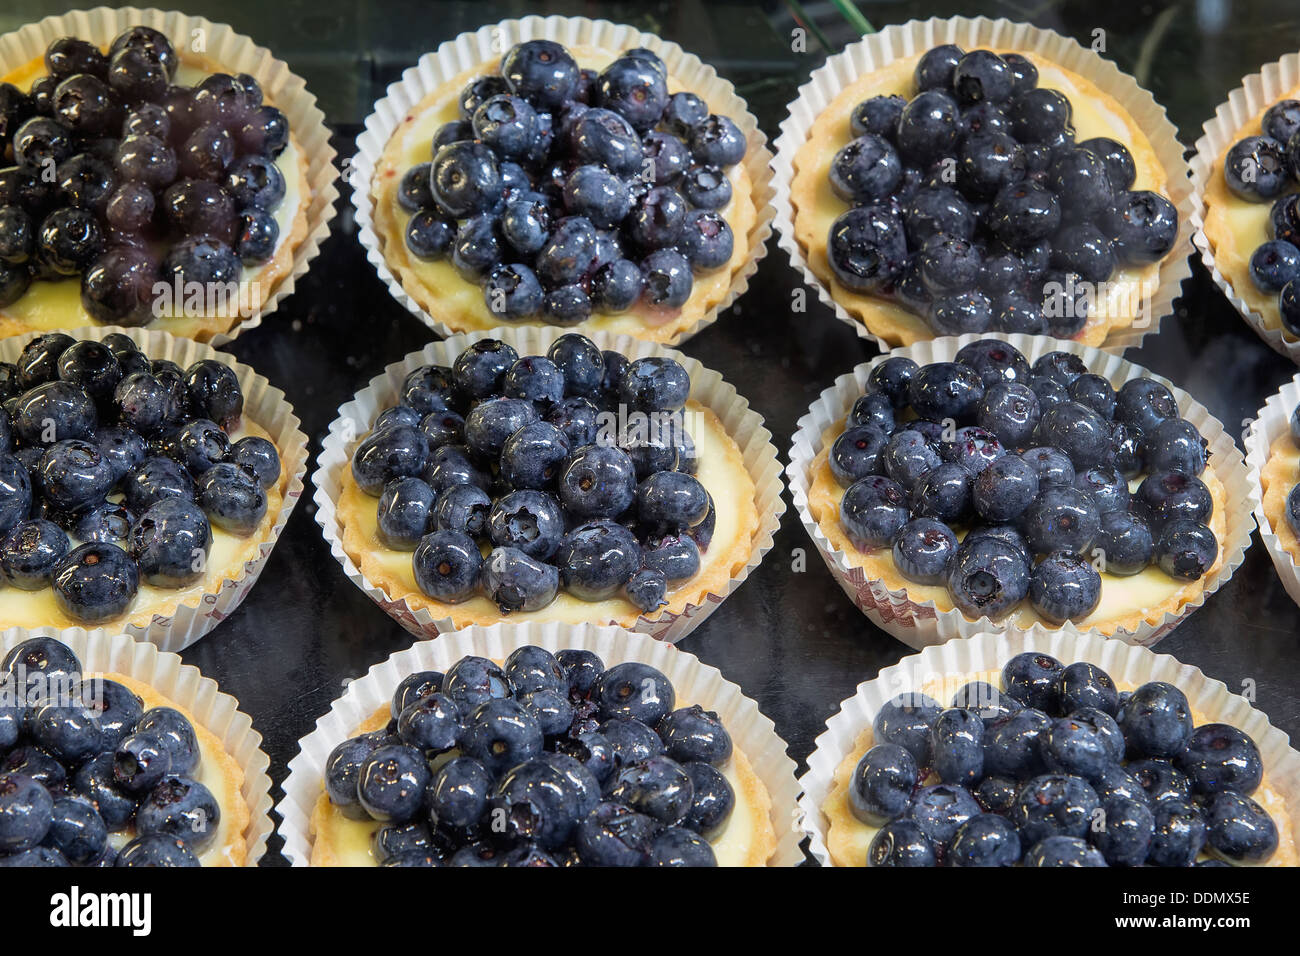 Lemon Curd Fruit Tarts with Blueberries at Bakery Shop Stock Photo